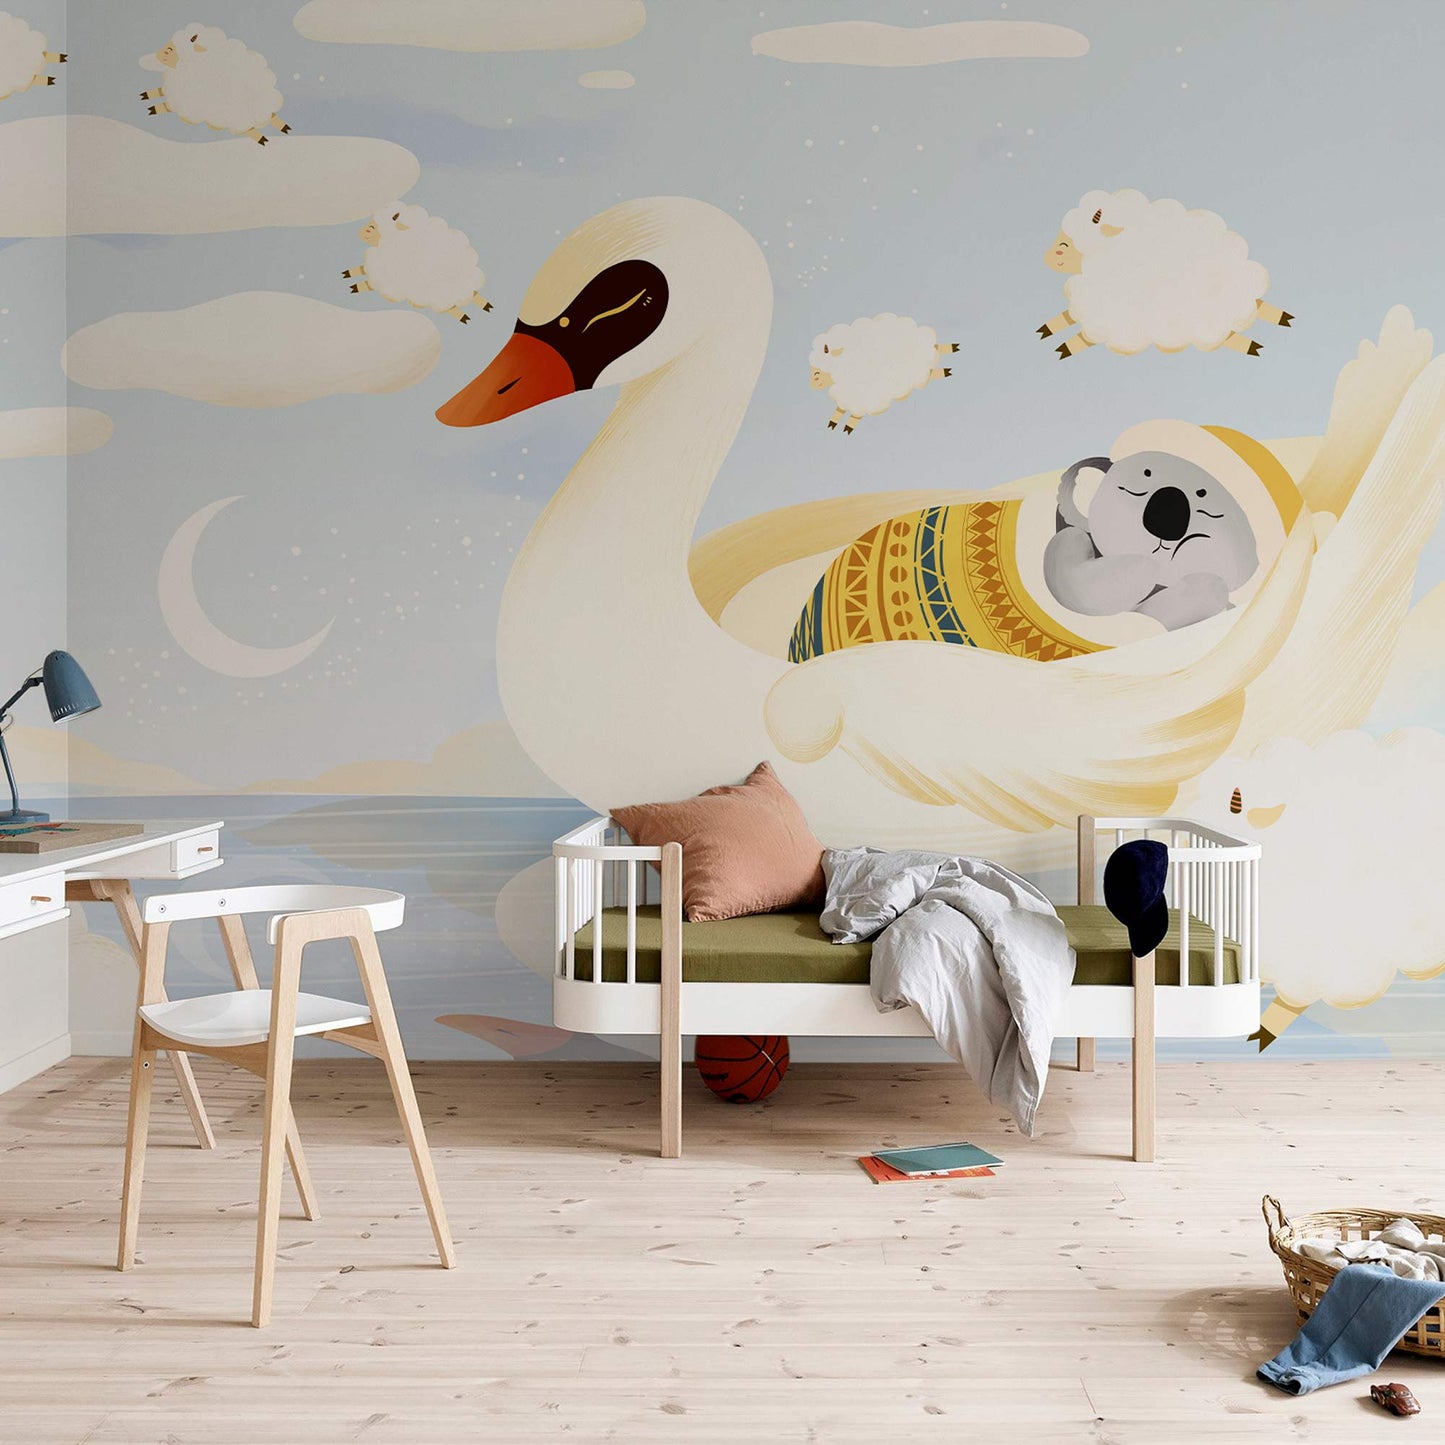 Wallpaper mural with sleeping animals that may be used for decorating children's rooms